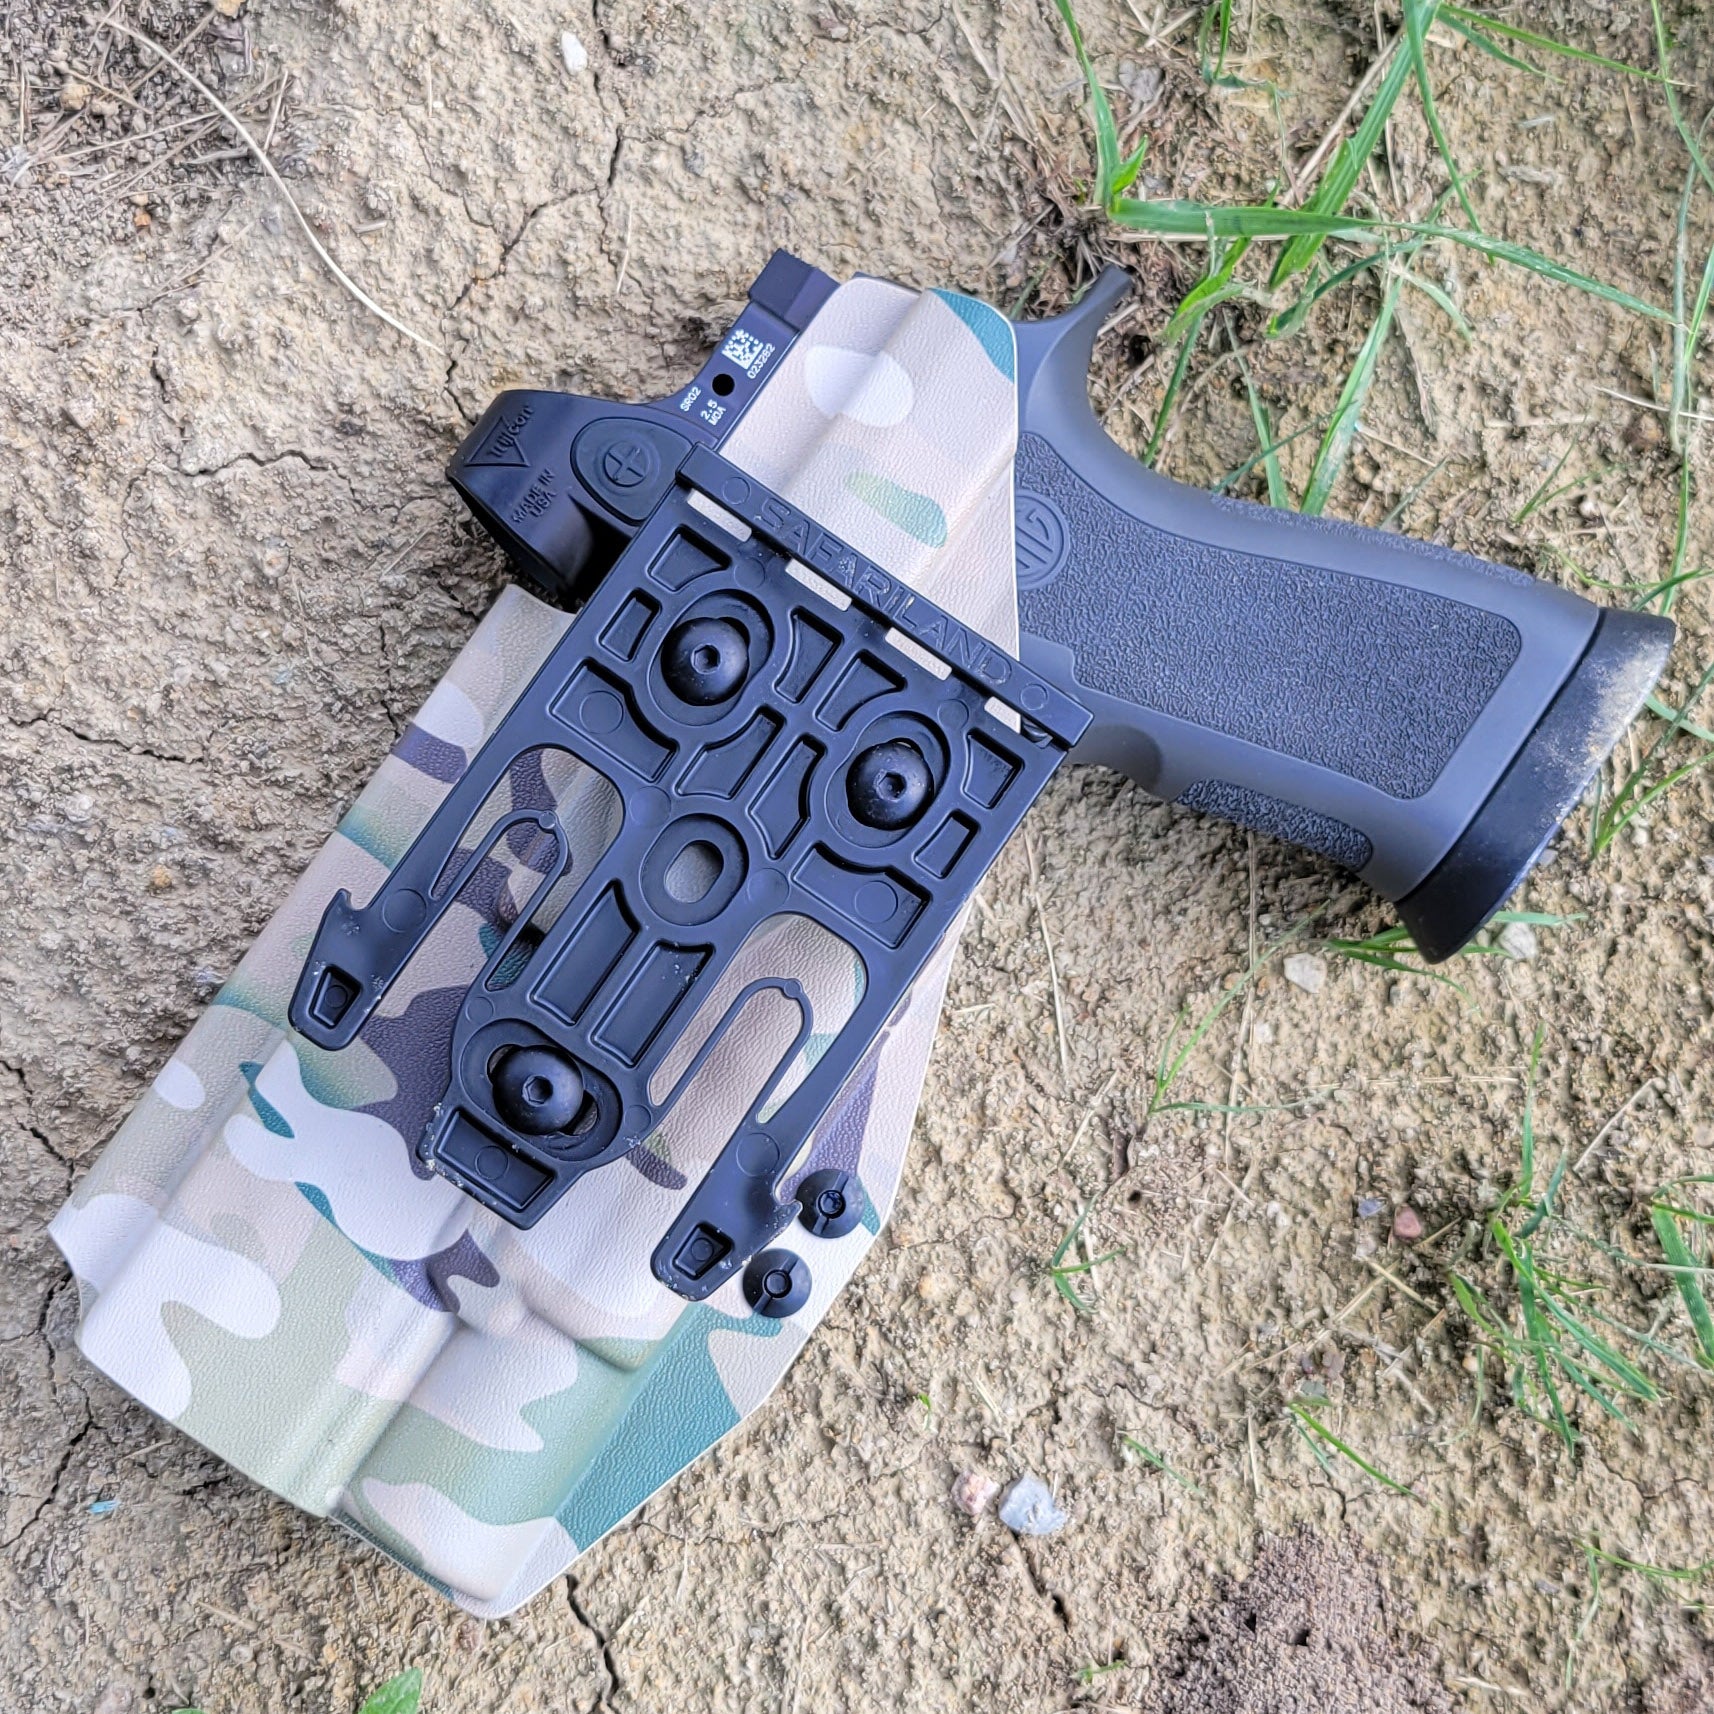 Outside Waistband Kydex Holster designed to fit the Sig Sauer P320 Full Size, M18, M17, X-Five, and Carry pistols with the Surefire X300U-A or X300U-B light & GoGuns USA Gas Pedal mounted to the pistol. Cleared for red dot sights and front suppressor height sights up to 3/8 tall.  Made in the USA